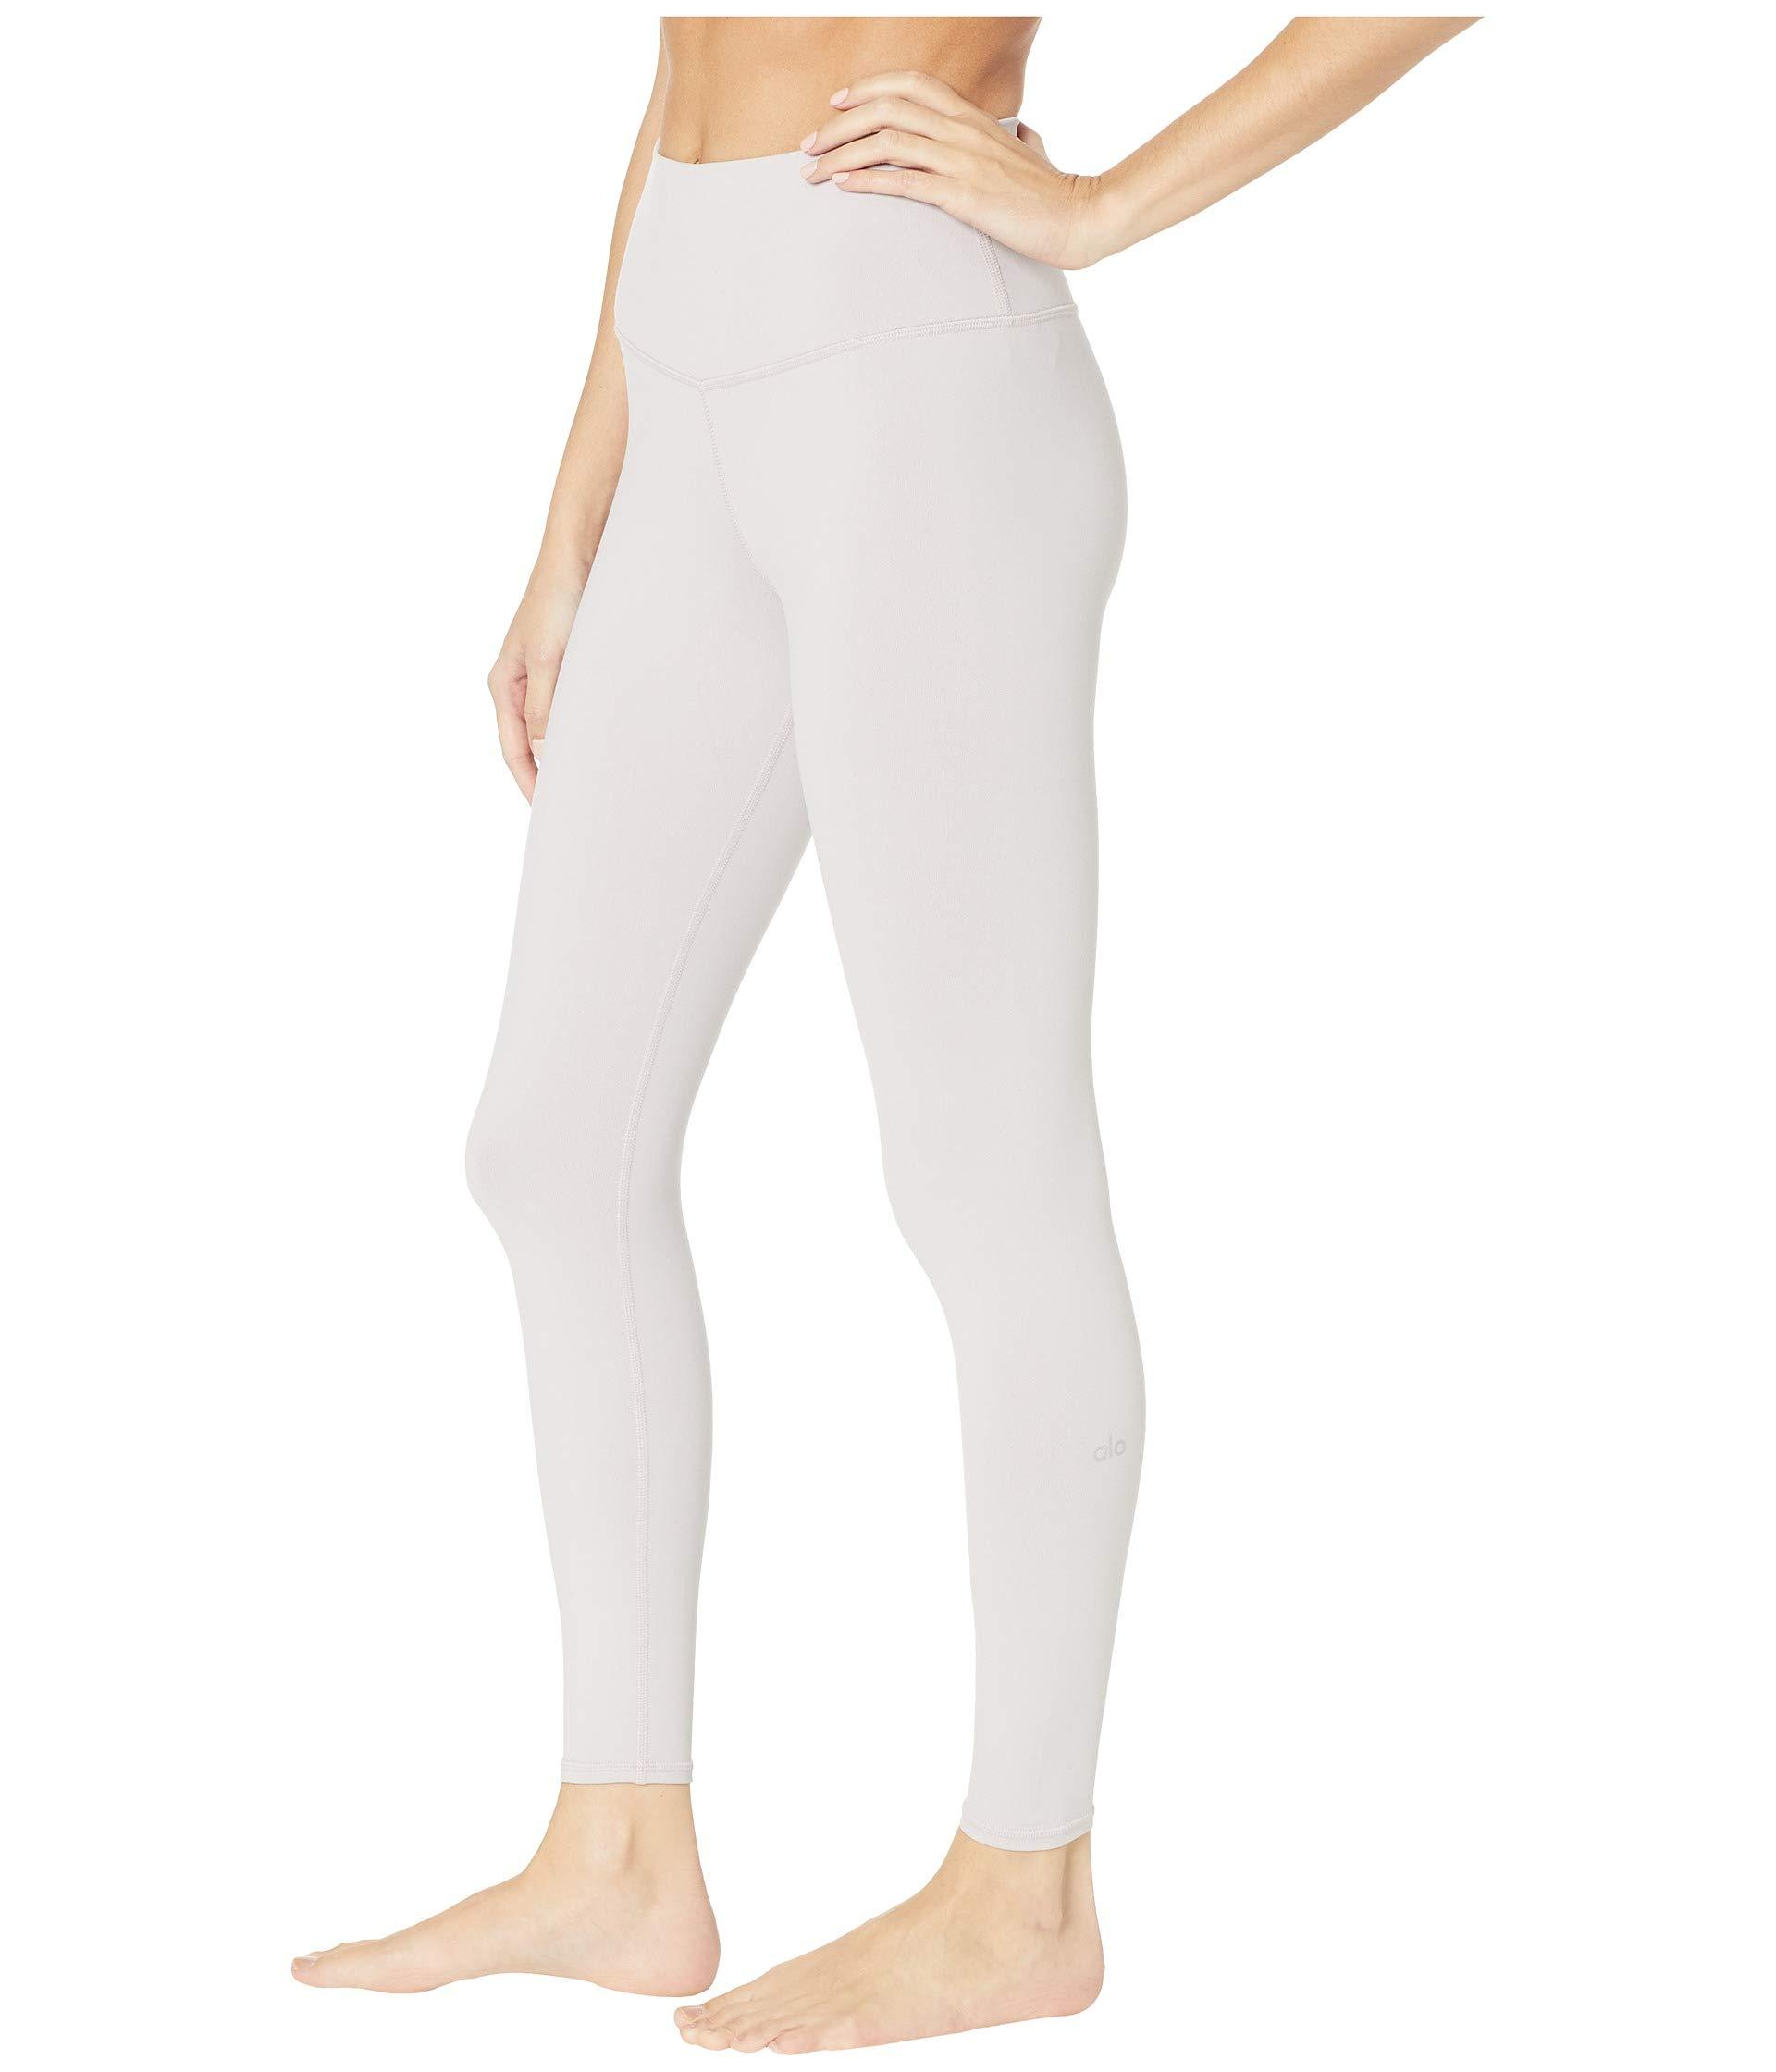 Best White Legging For Cellulite: Alo Yoga 7/8 High-Waist Airbrush Legging, The 7 Best White Leggings For Workouts and Everyday Wear